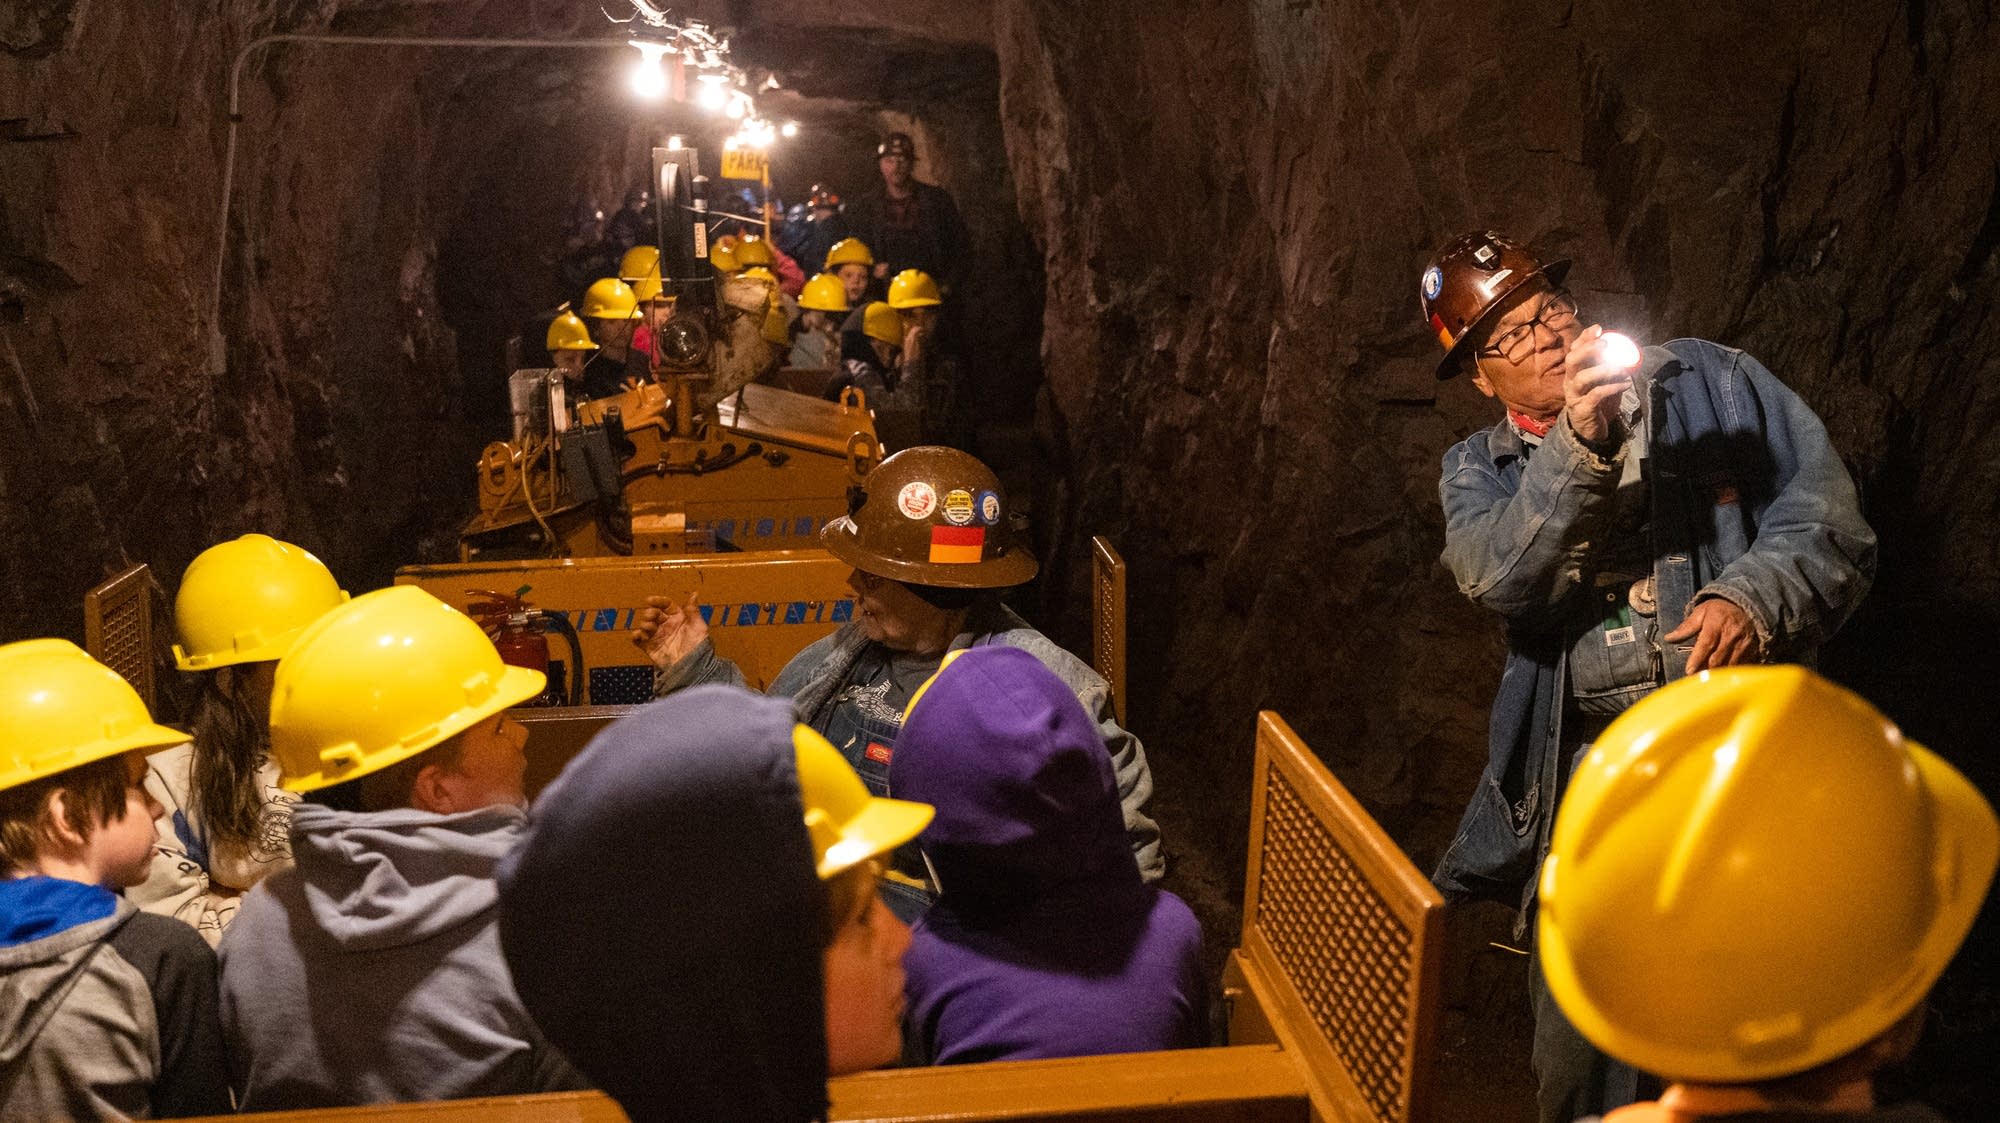 After four year hiatus, underground mine tours resume at Soudan State Park